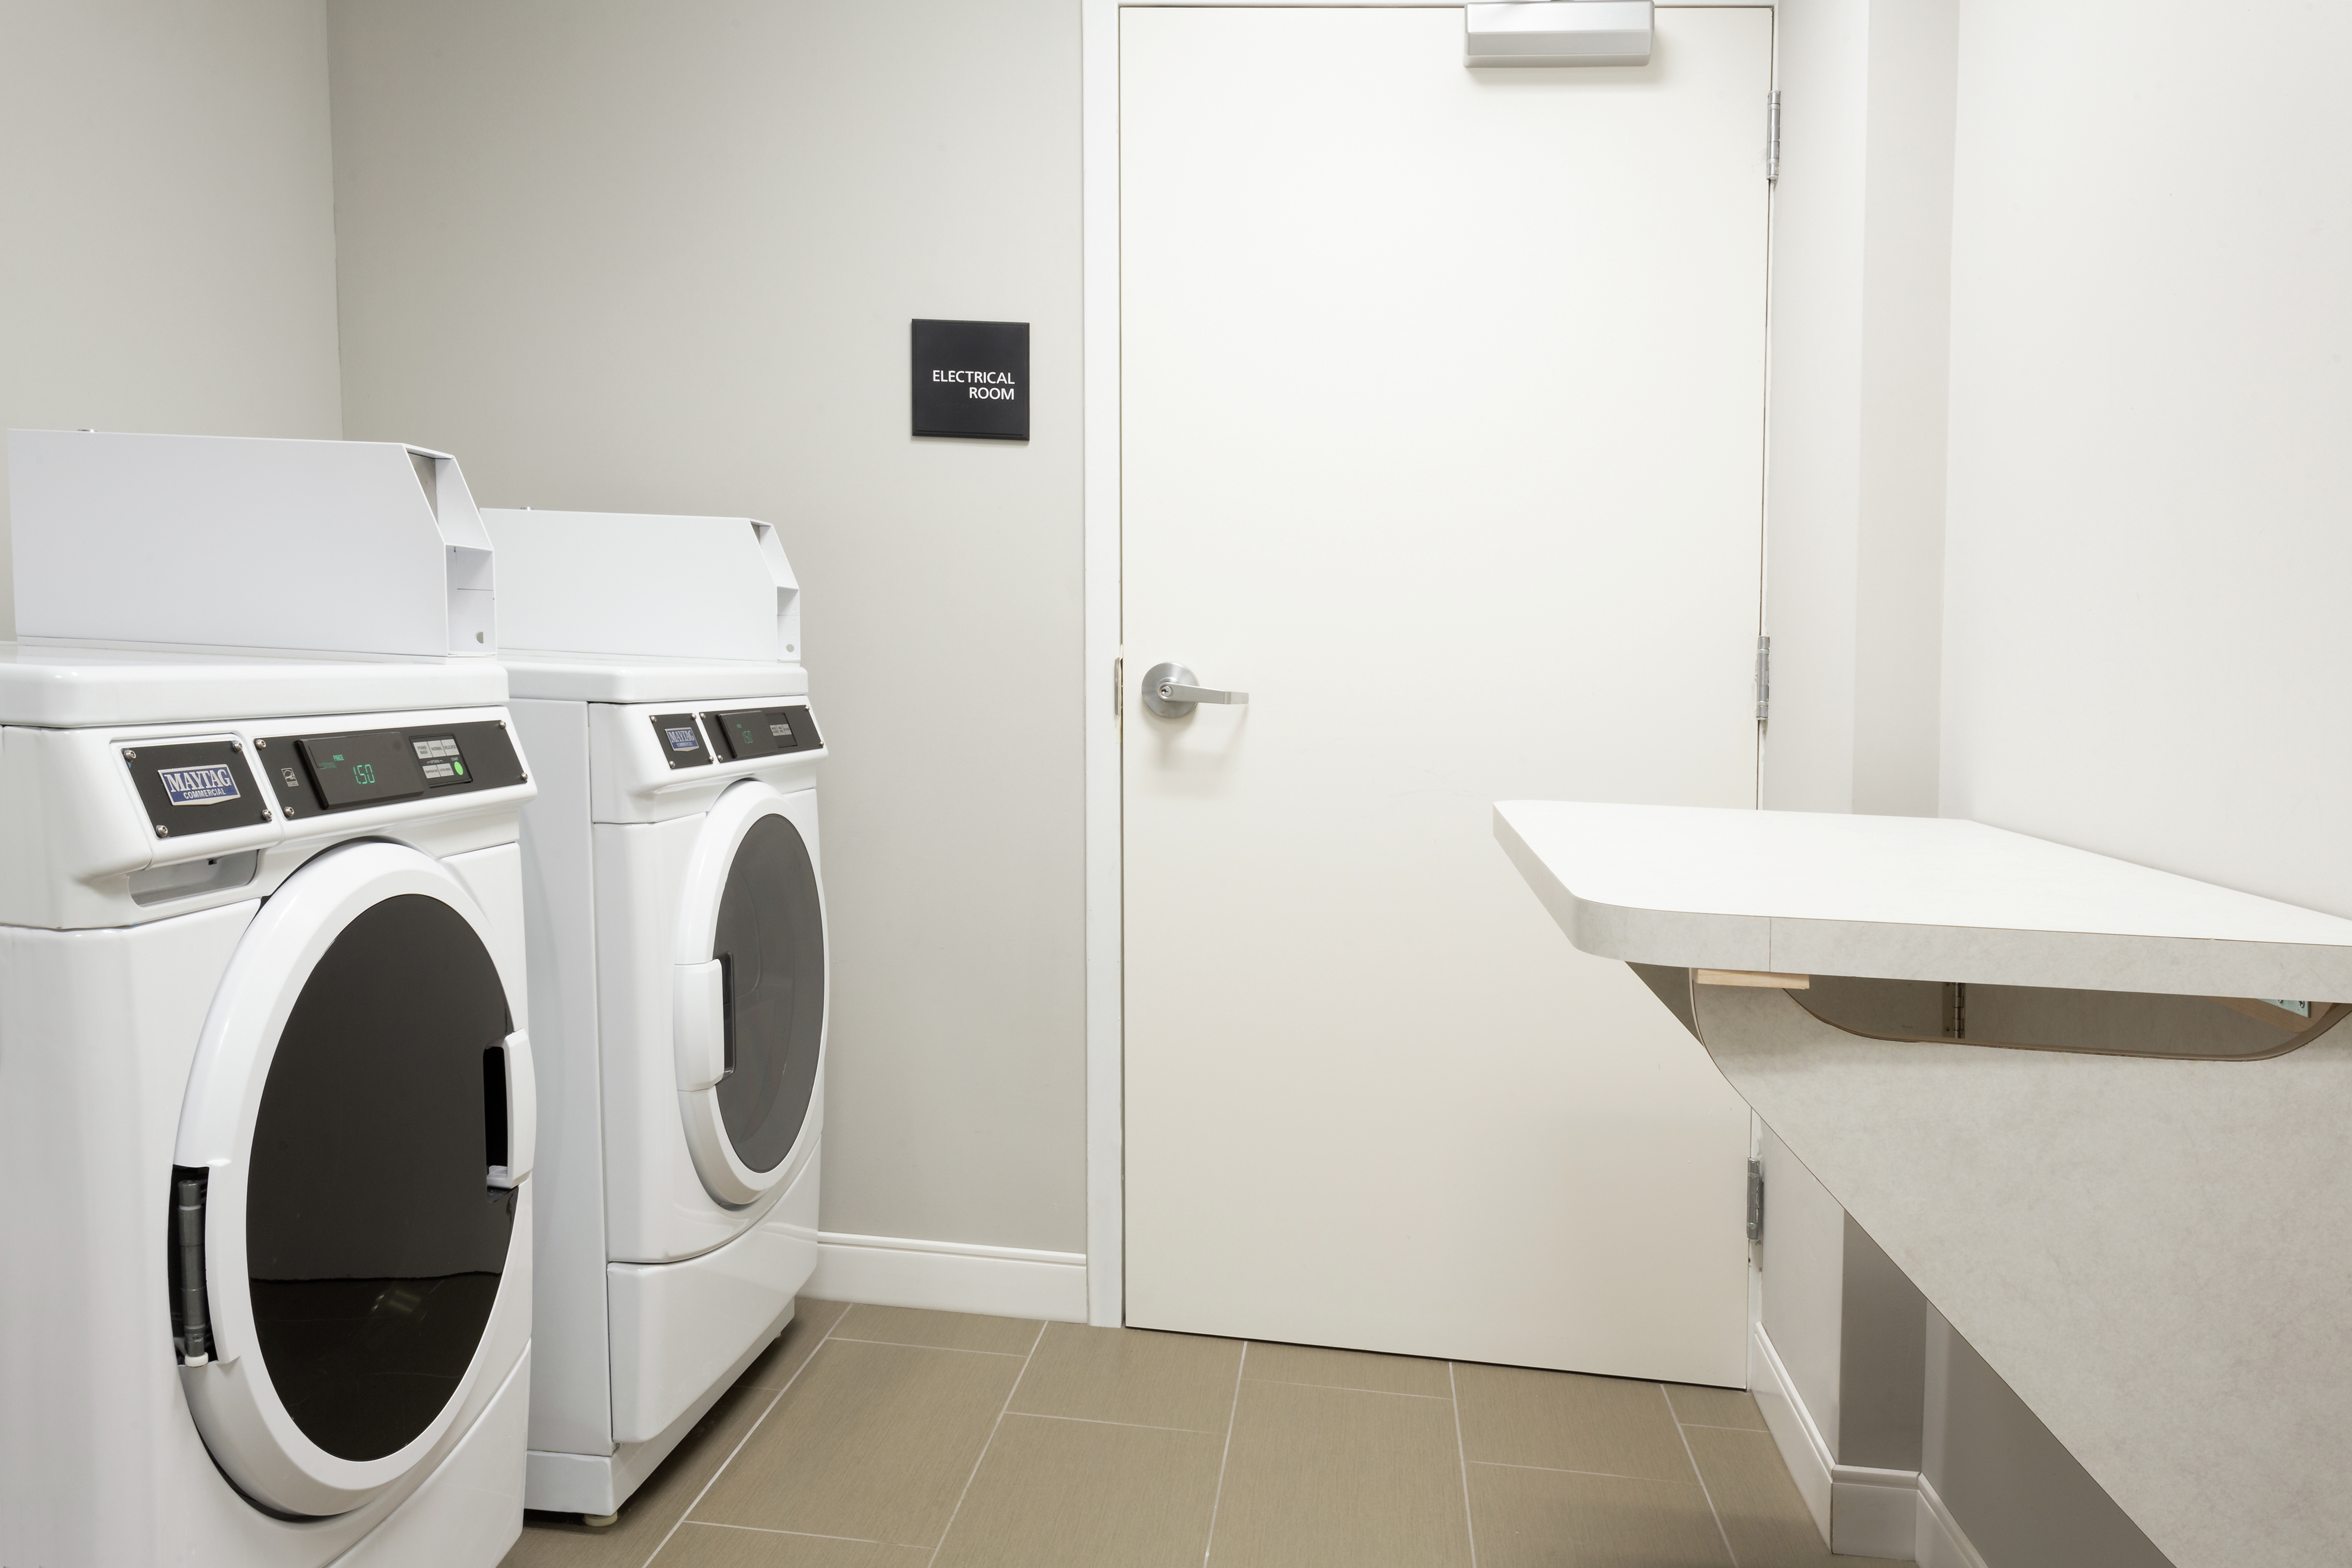 Guest Laundry Facility 